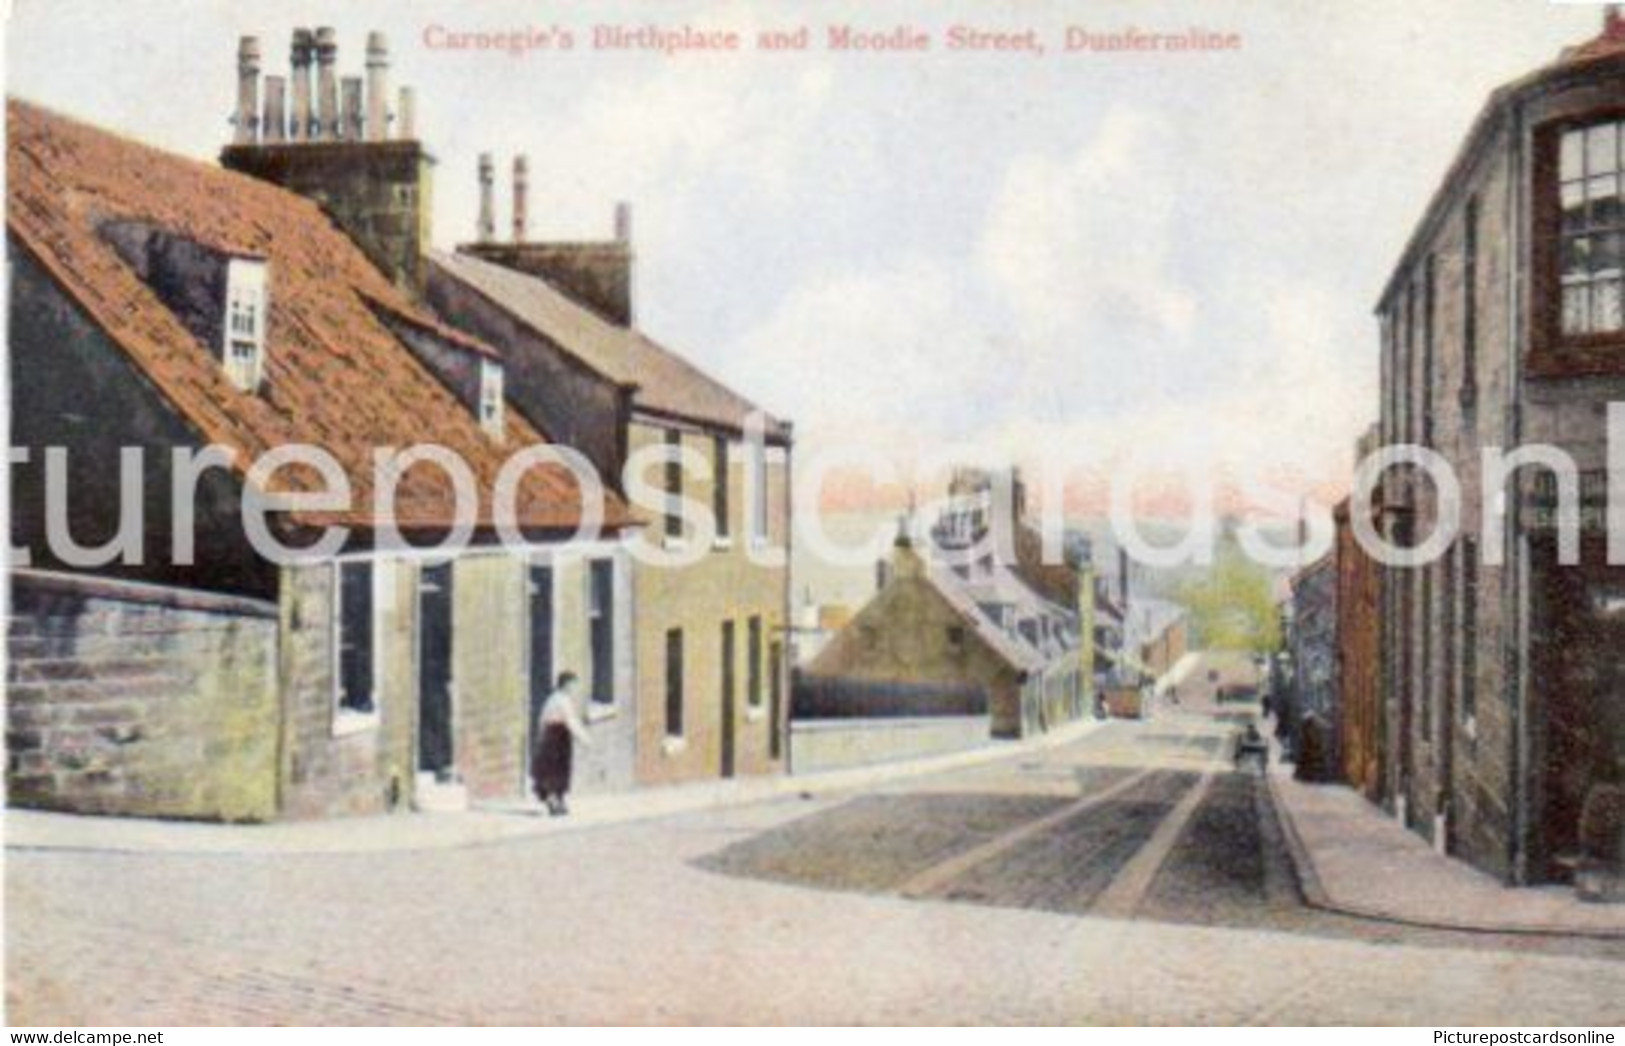 DUNFERMLINE CARNEGIES BIRTHPLACE AND MOODIE STREET OLD COLOUR POSTCARD SCOTLAND - Fife